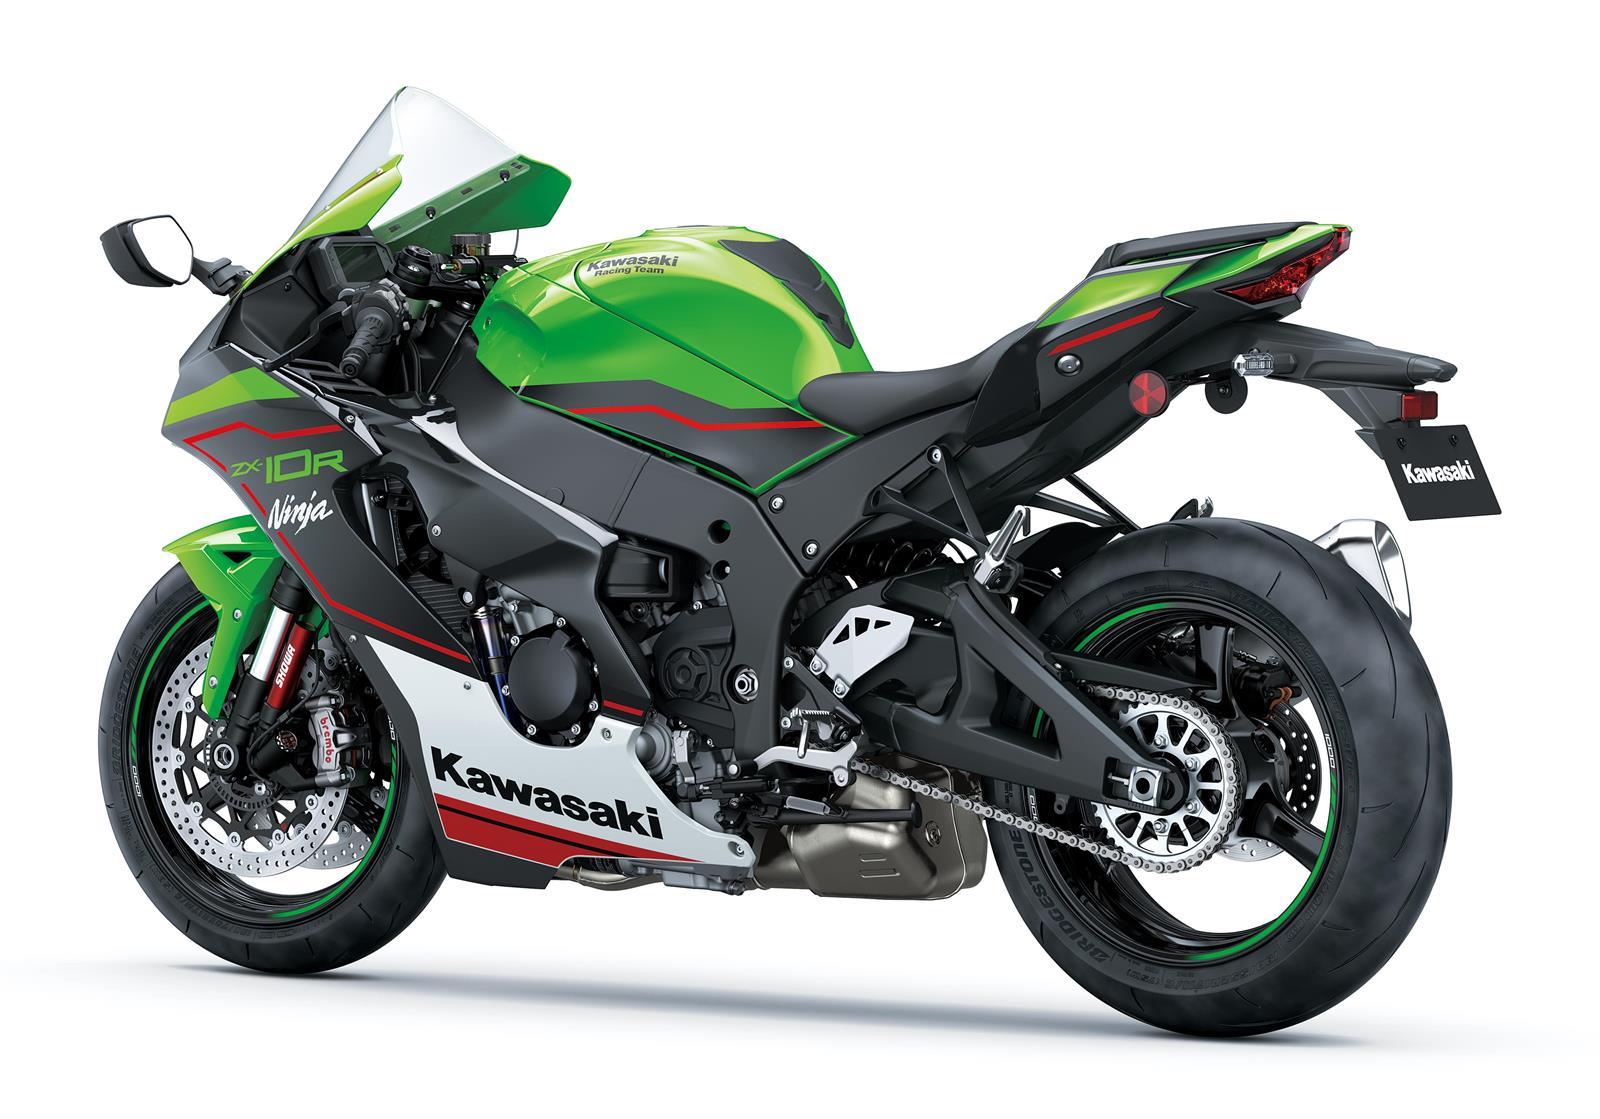 analyse Arrangement Billy ged Kawasaki Ninja ZX Price, Specs, Review, Pics & Mileage in India